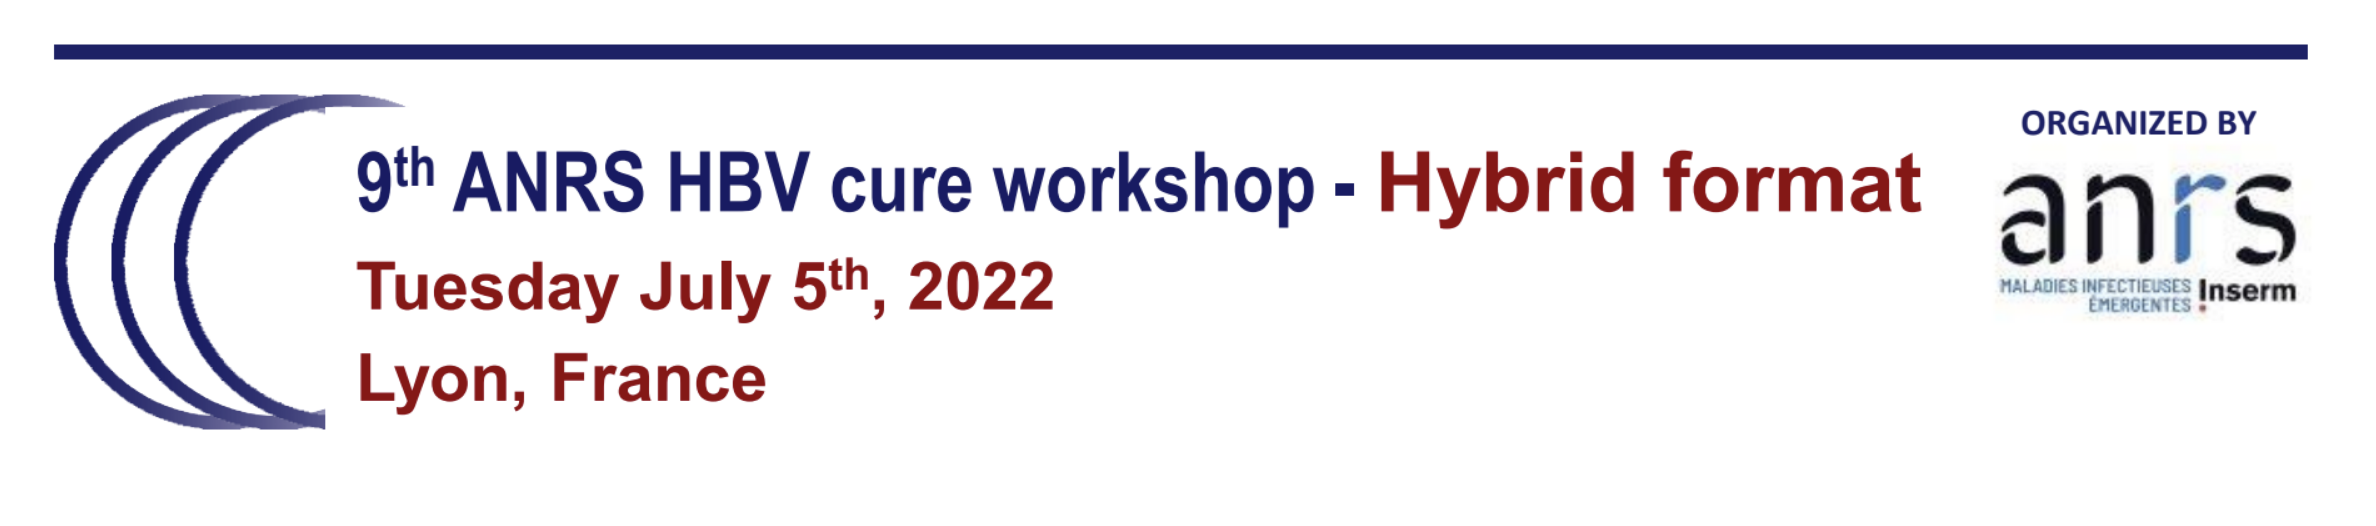 9th HBV Cure Workshop supported by ANRS | Emerging Infectious Diseases